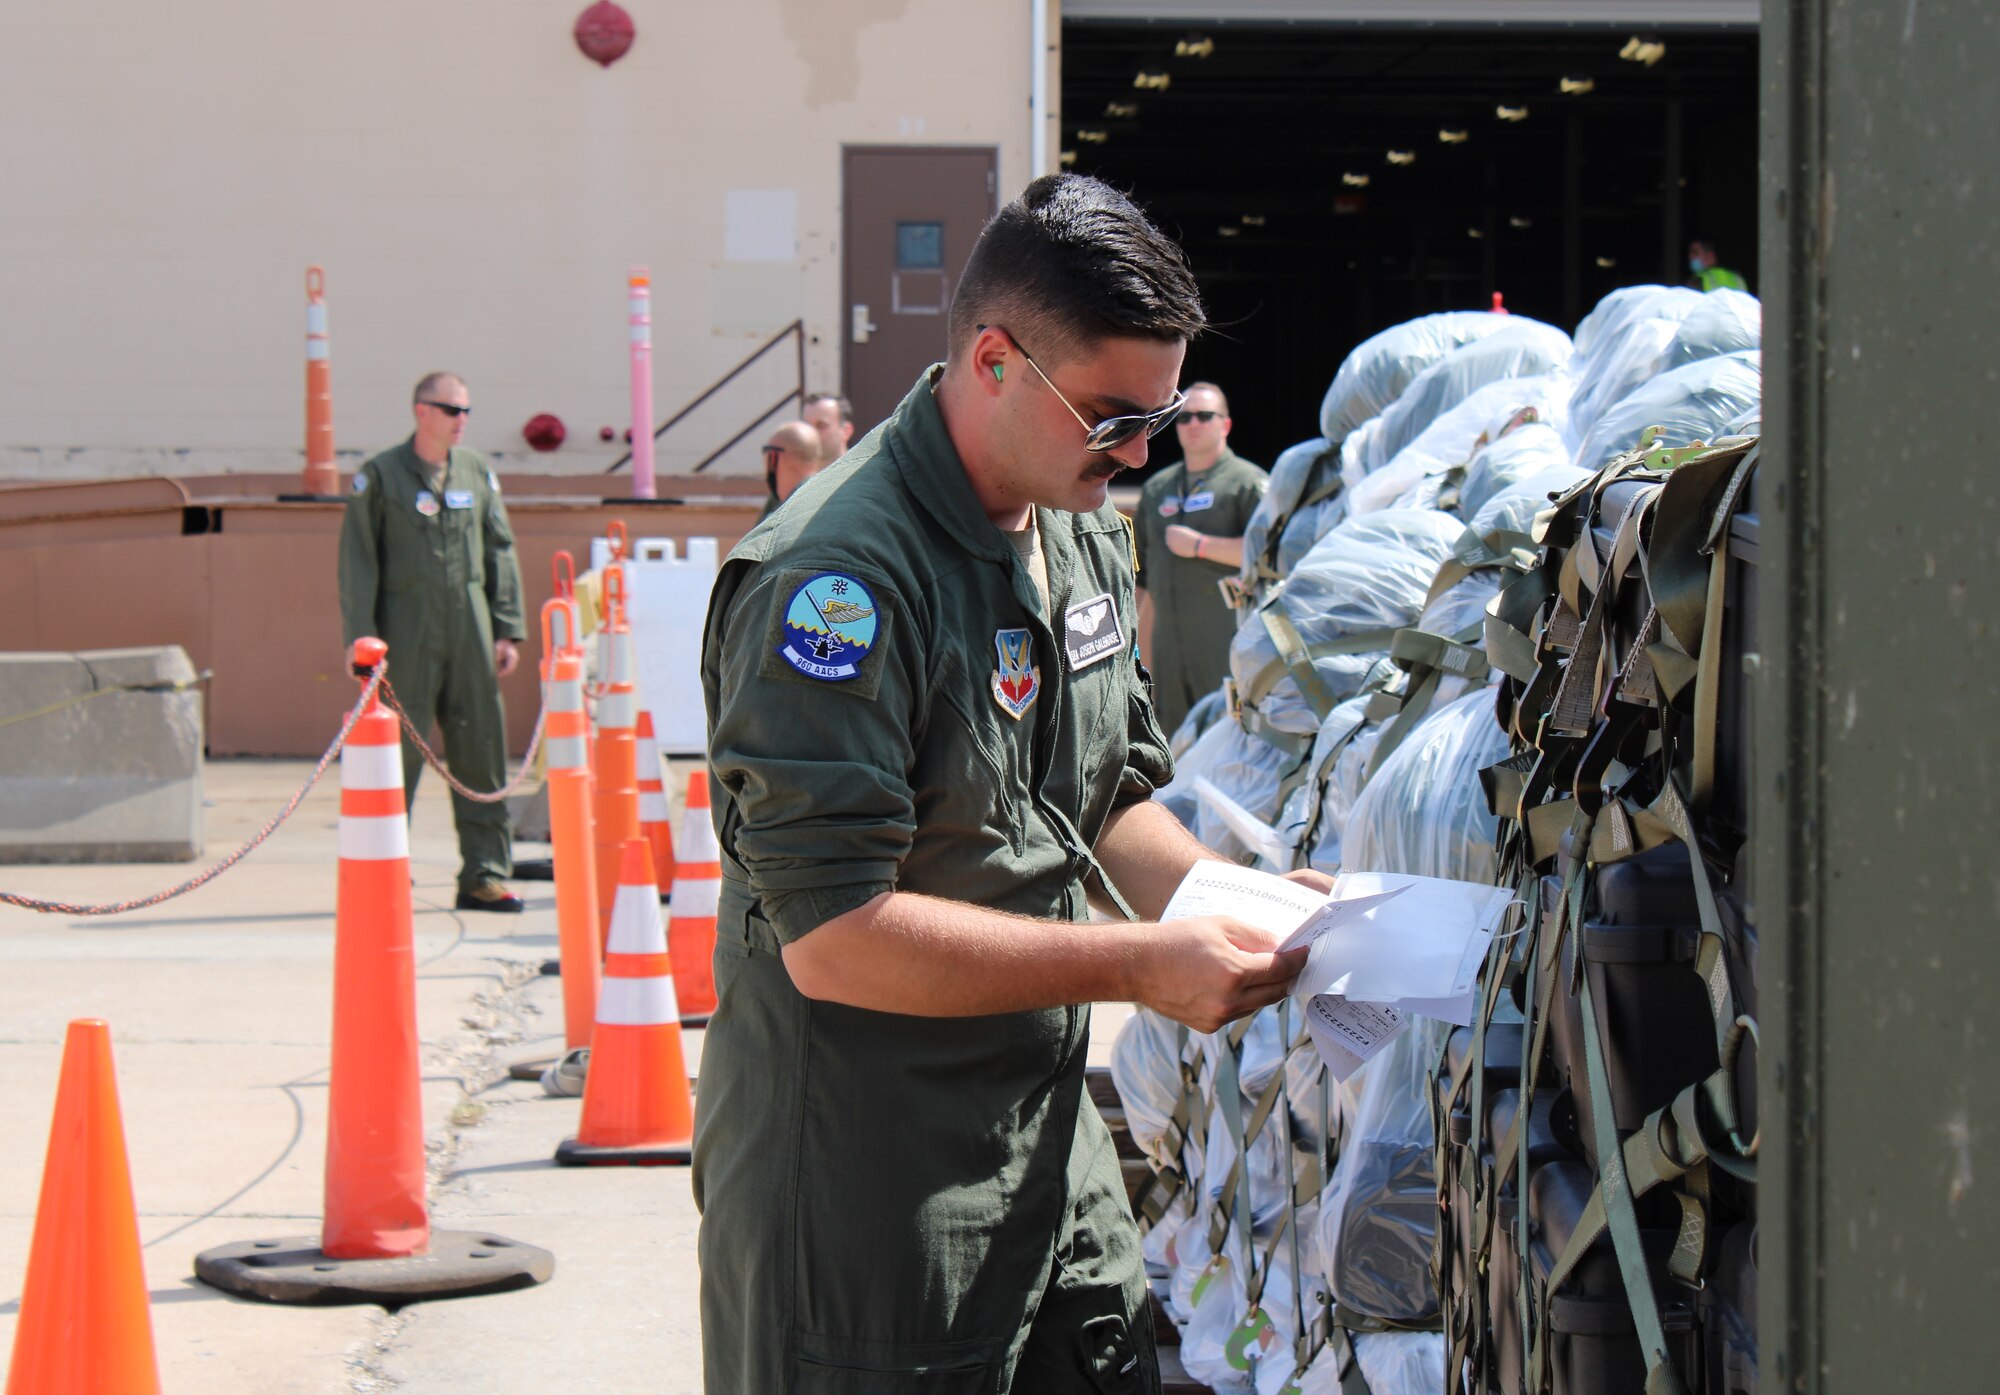 Airman performs final cargo check paperwork for exercise Agile Thunder 22-02